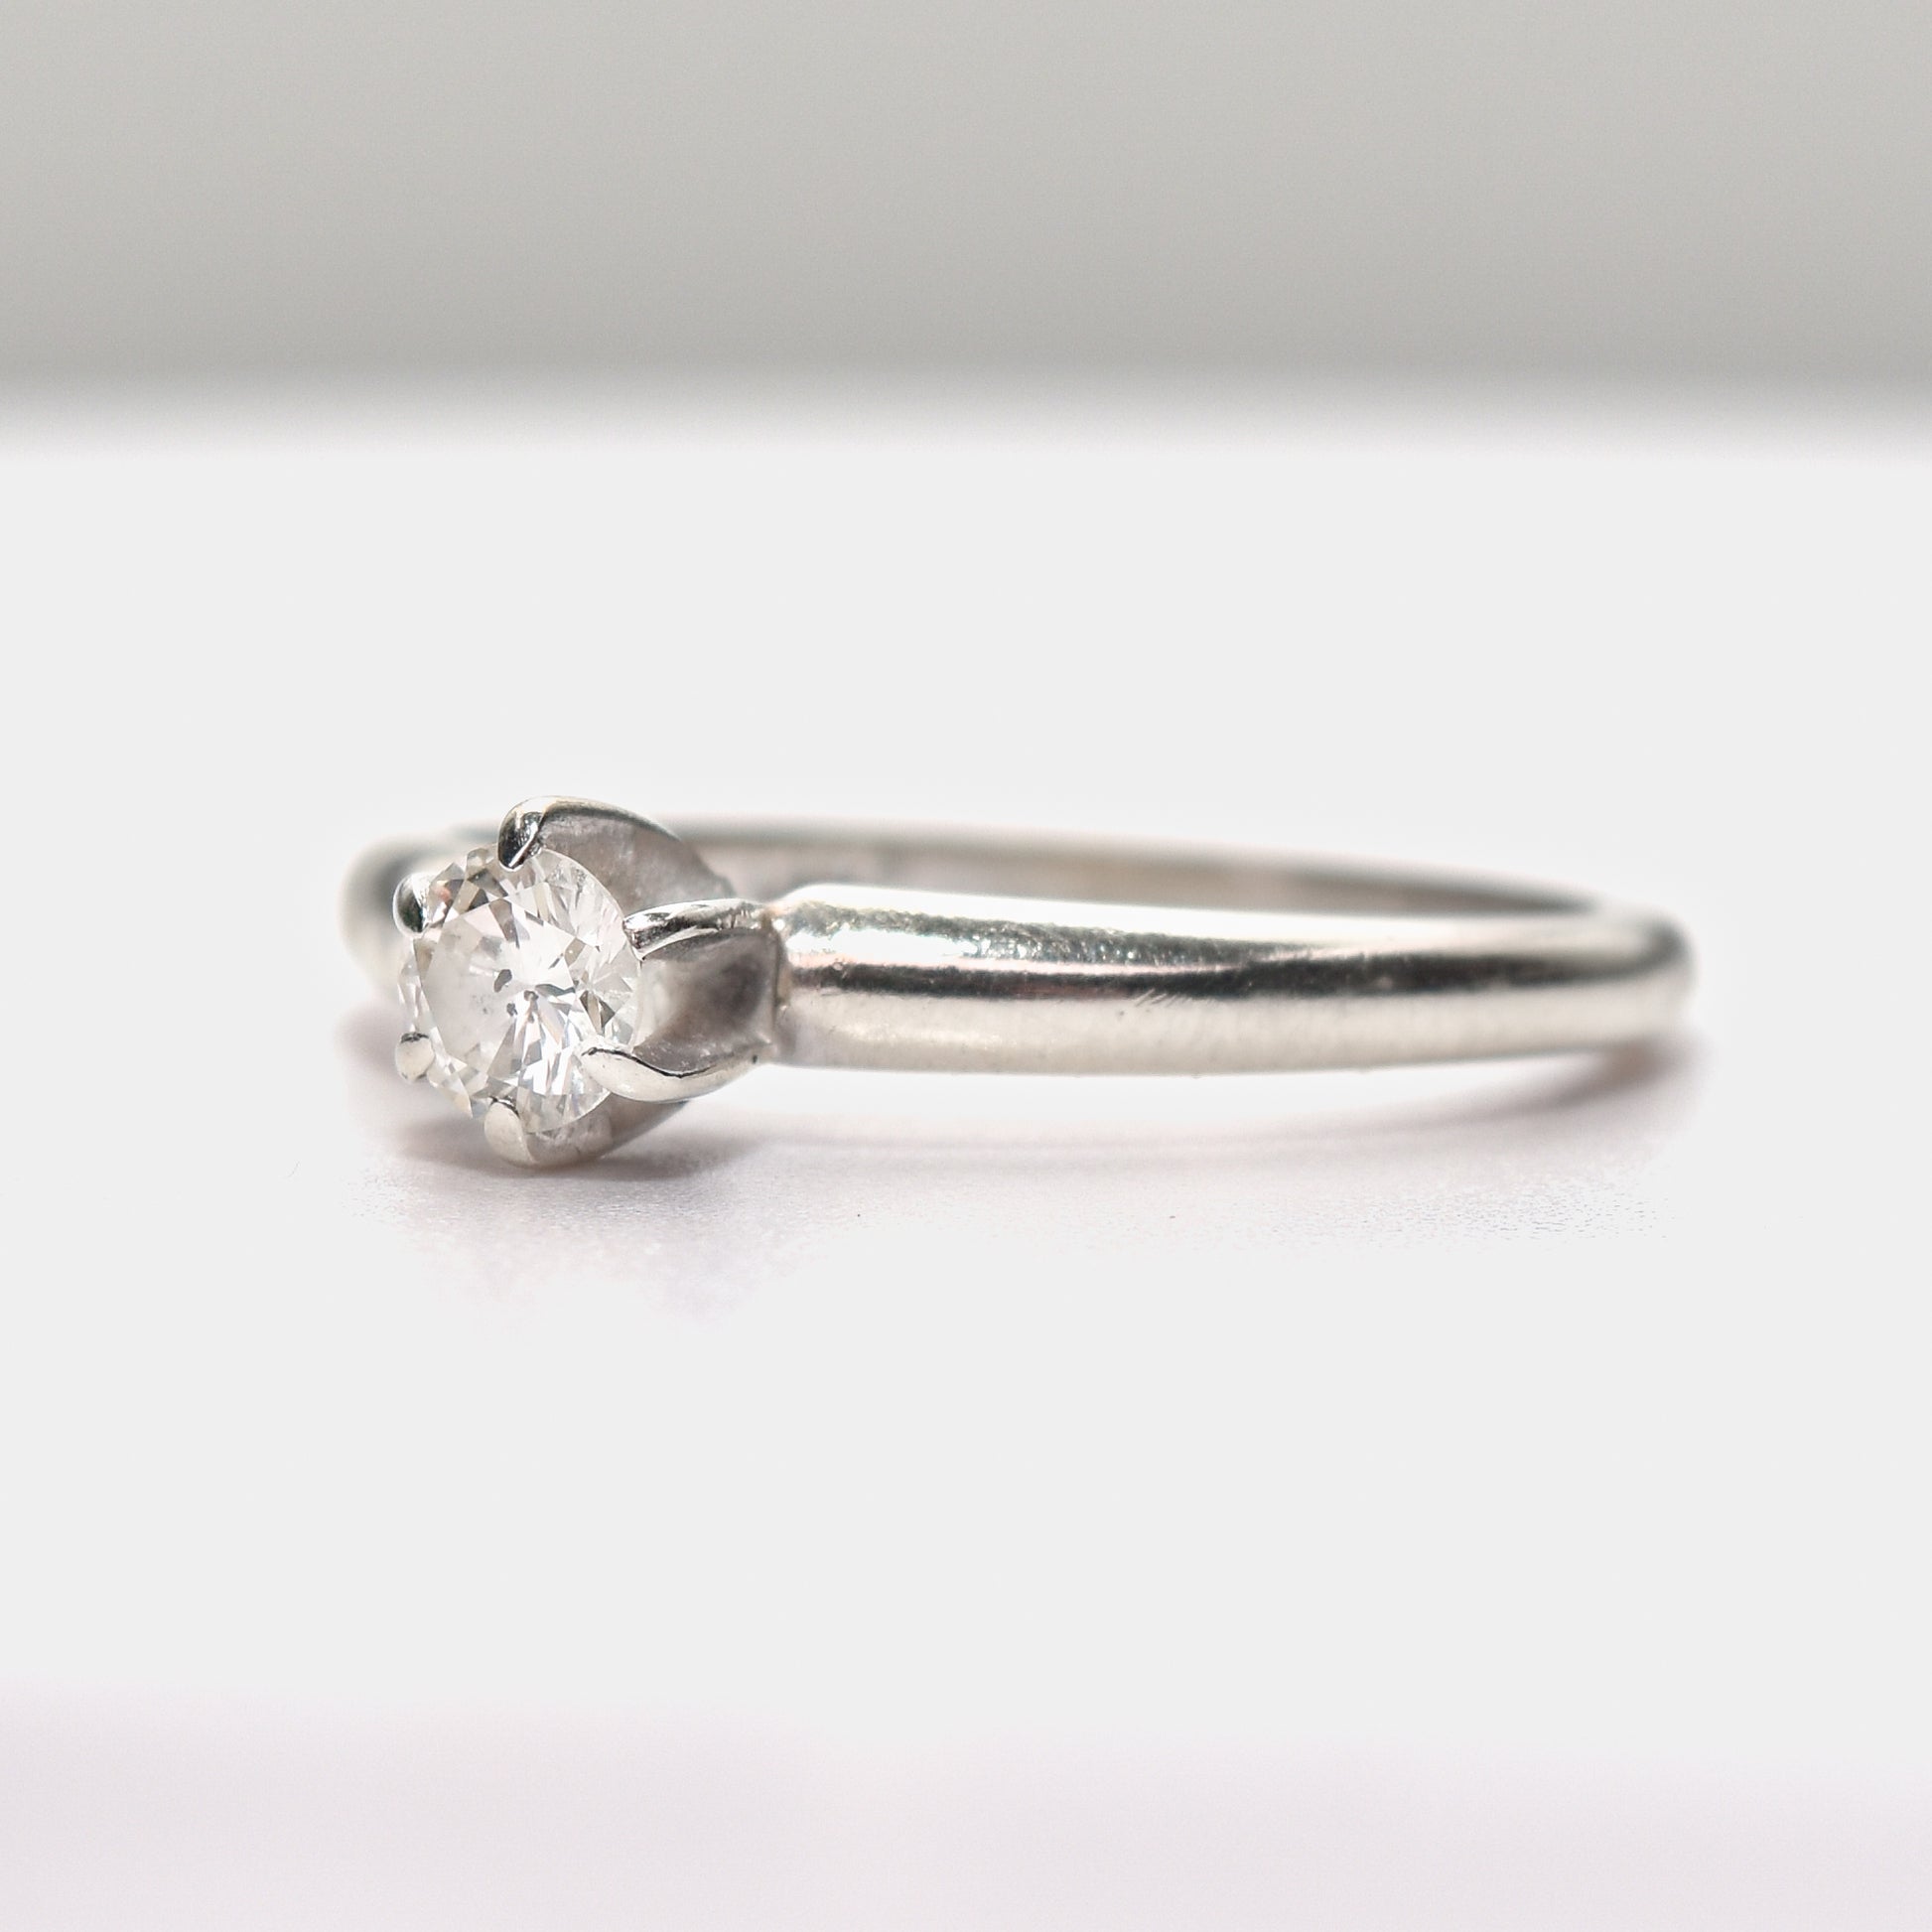 Minimalist 14K white gold engagement ring featuring a .25 carat brilliant solitaire diamond, size 6.25 US, on a clean background.